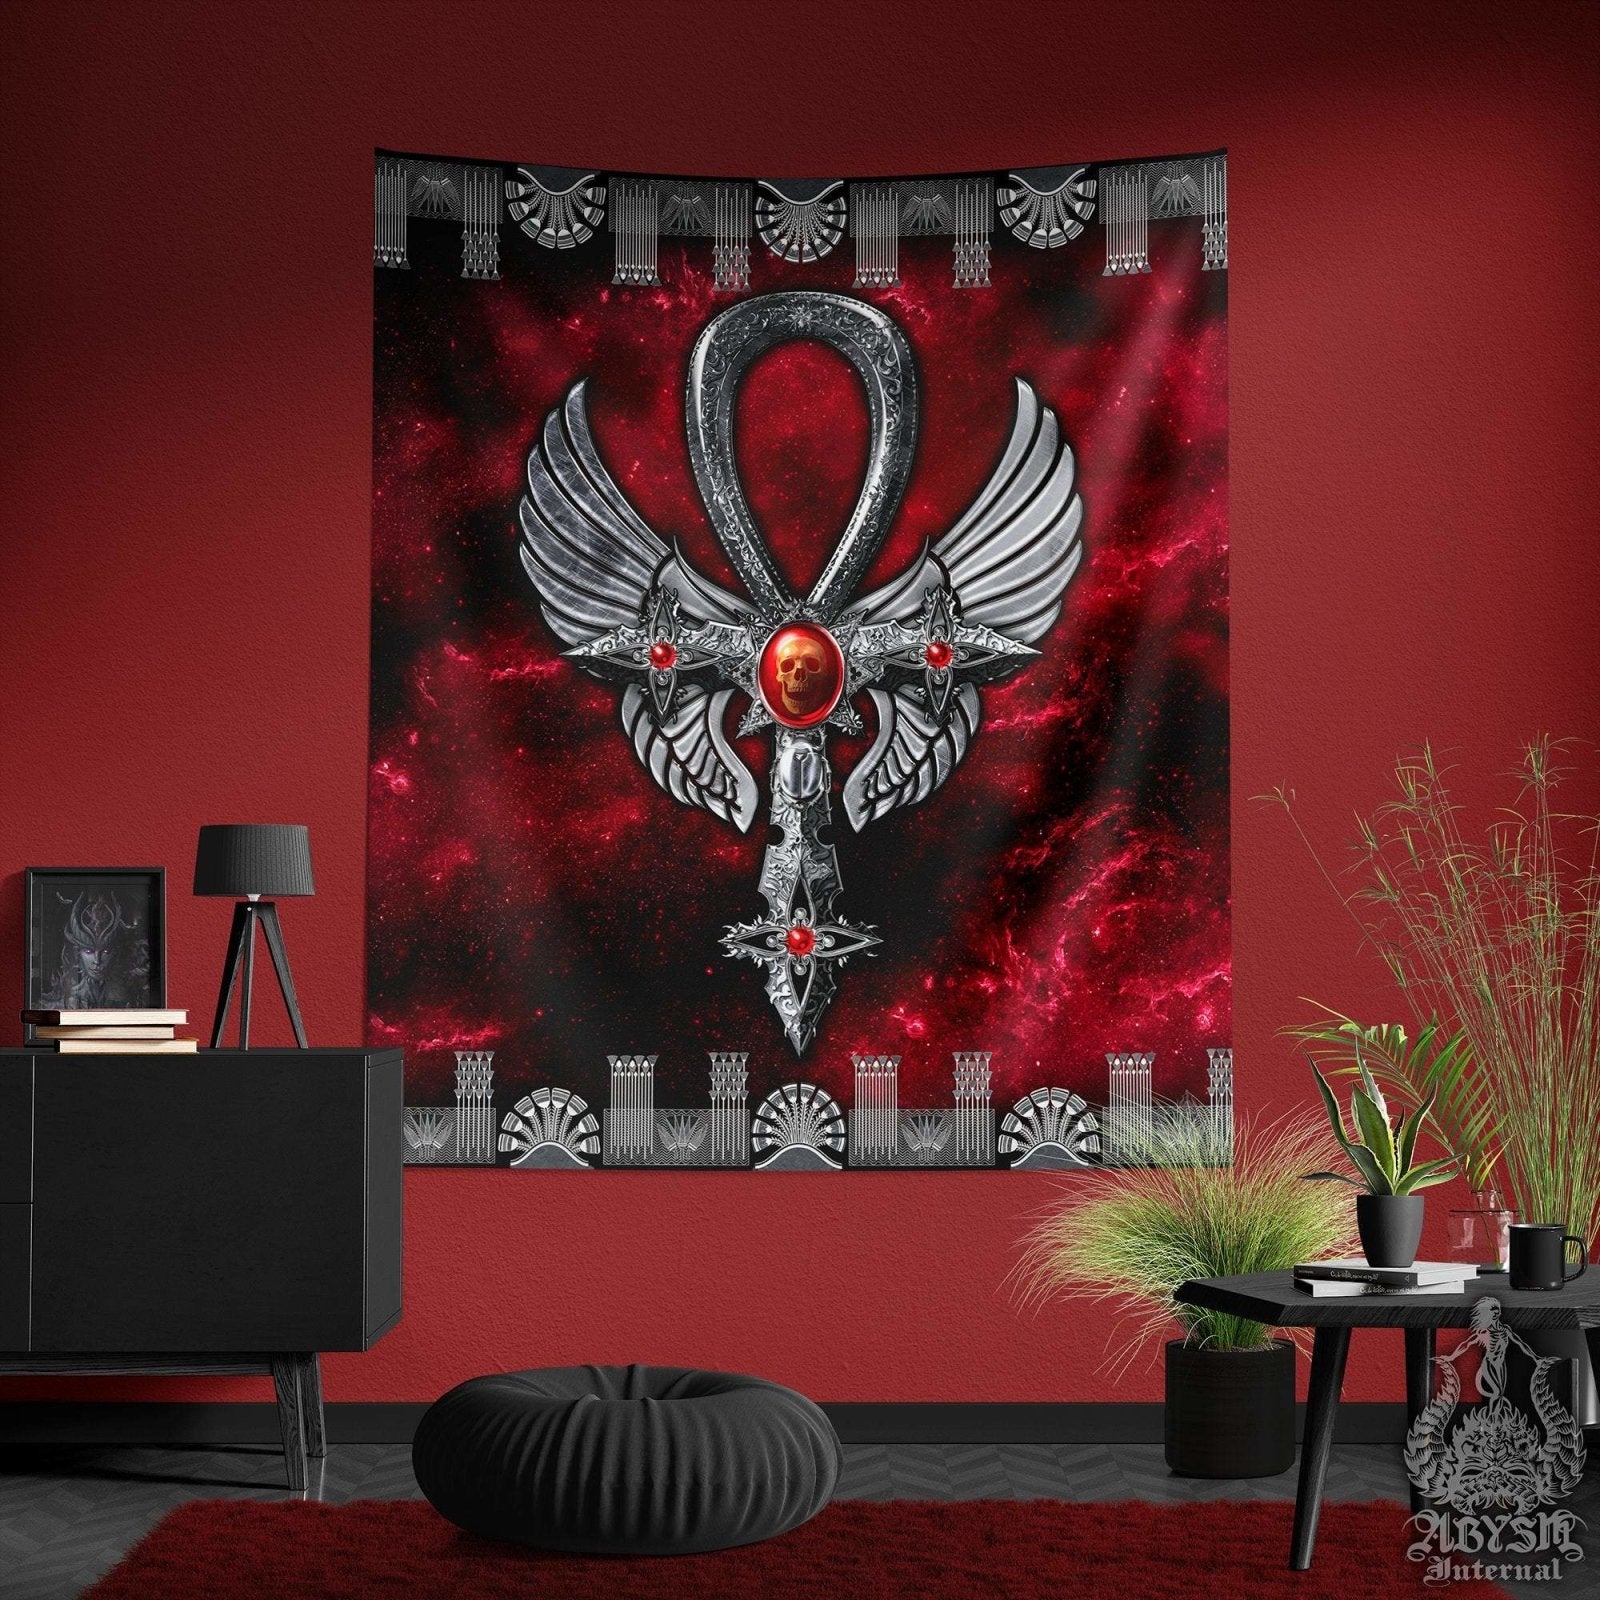 Ankh Tapestry, Gothic Wall Hanging, Occult Home Decor, Art Print - Egyptian Cross - Abysm Internal